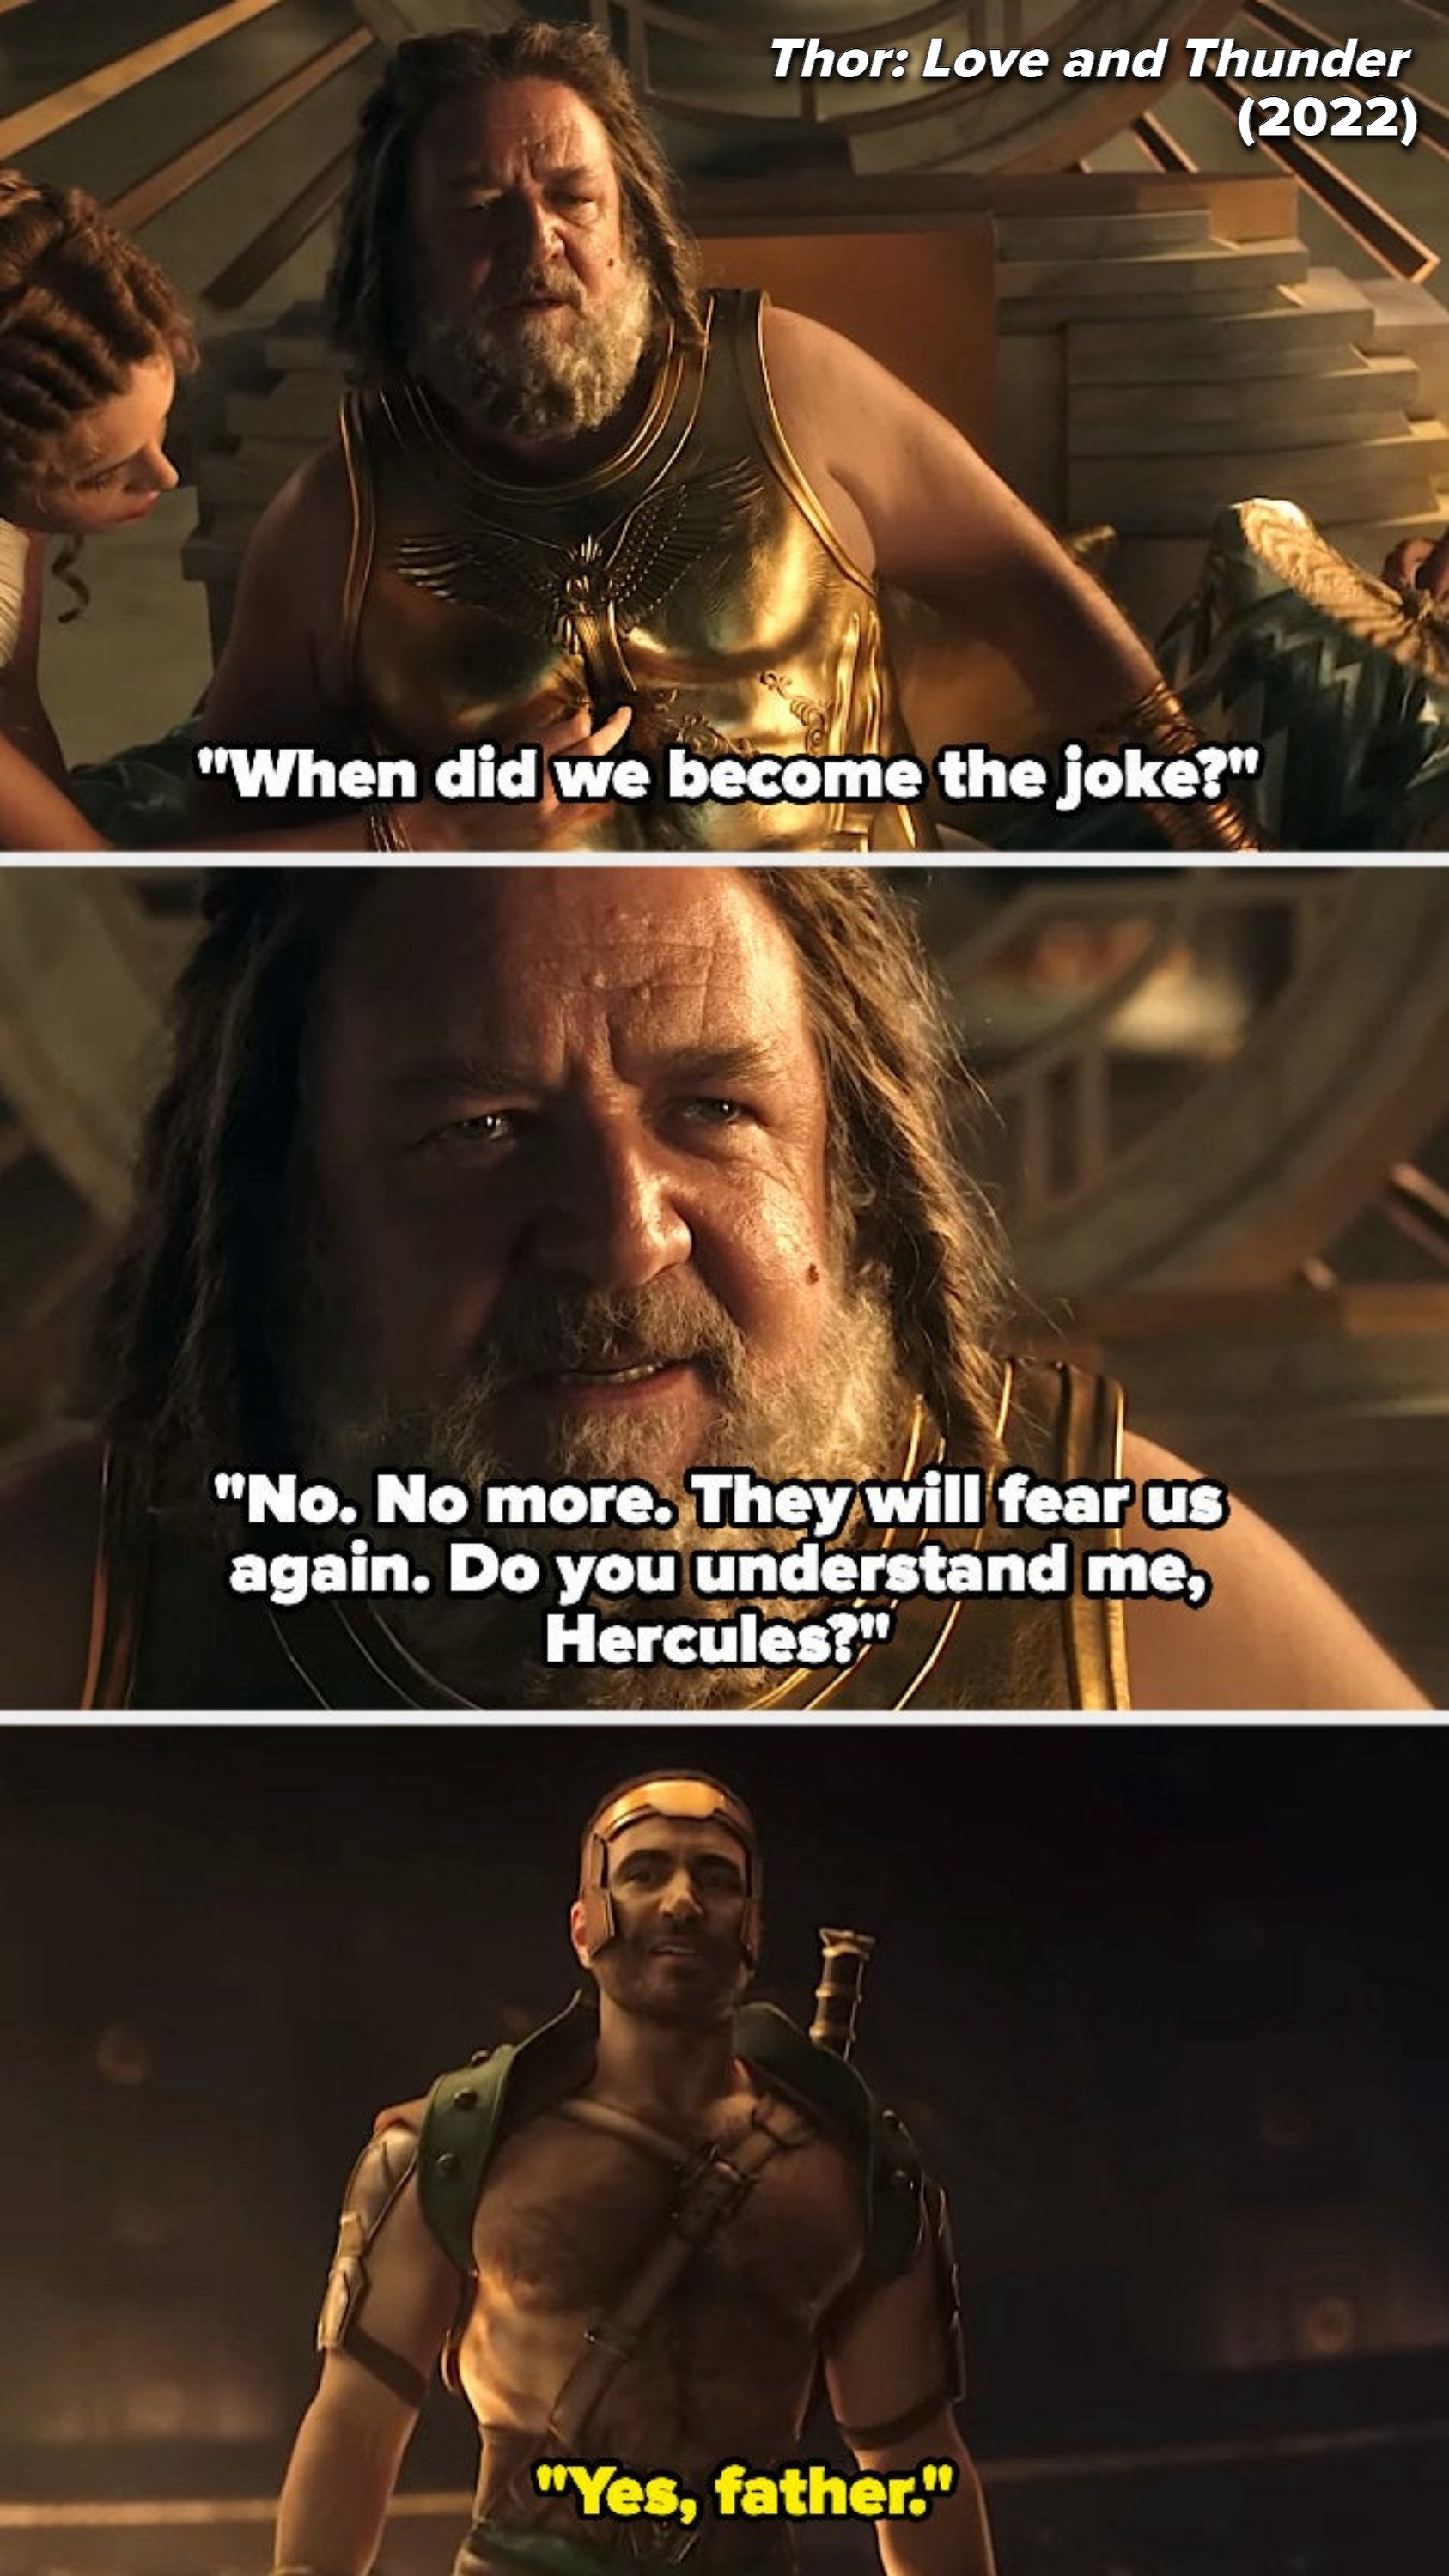 in thor, the dad says, they will fear us again. do you understand me hercules. and then the son responds, yes father